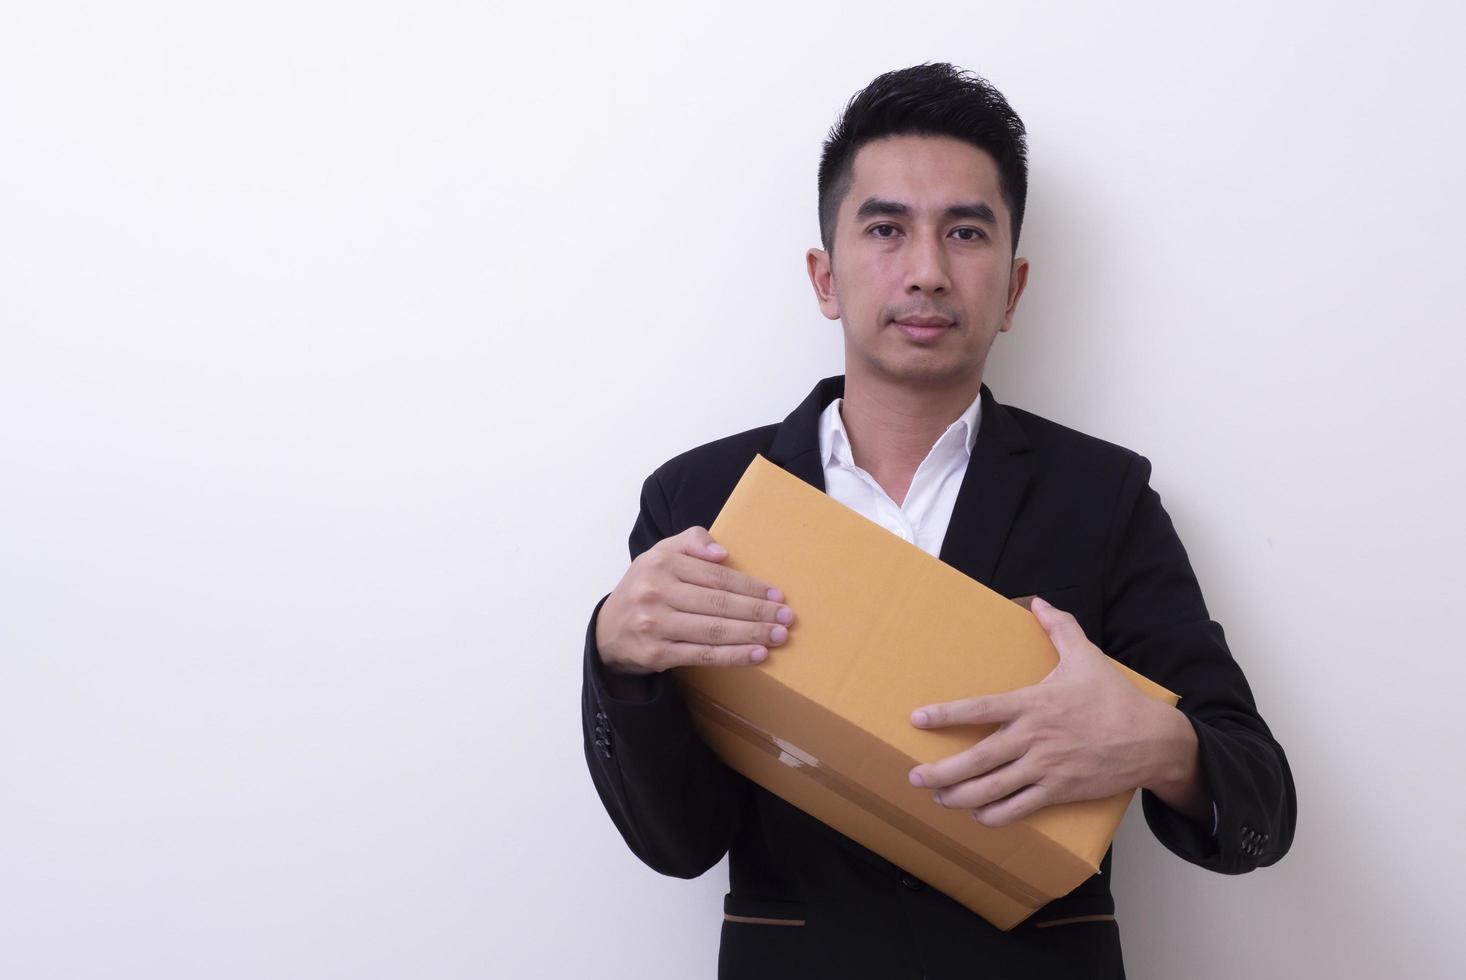 Shop assistant brings the parcel, isolated, white background photo